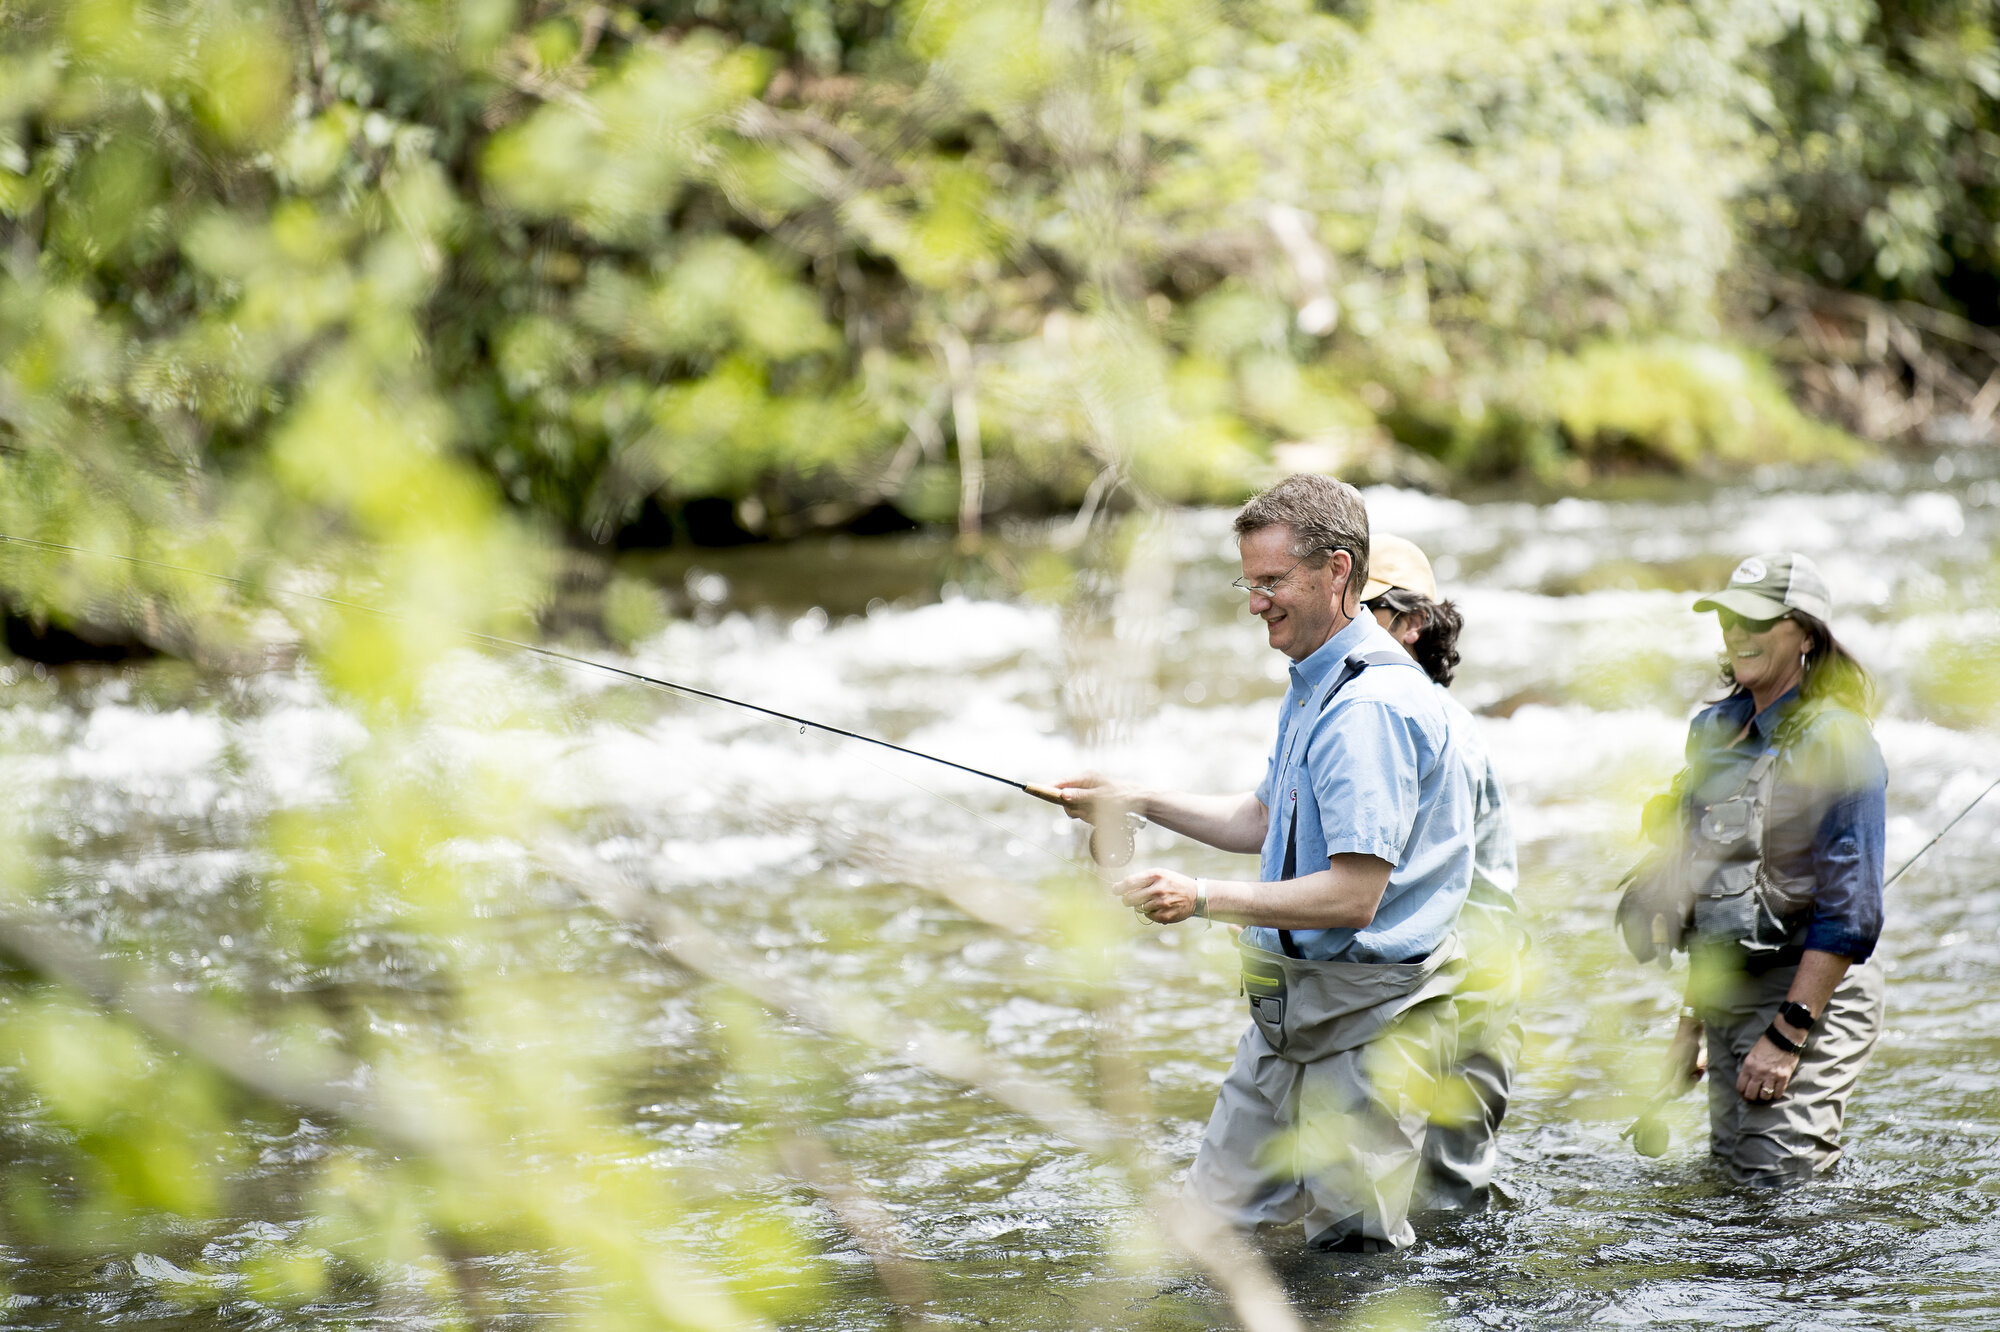  U.S. Rep. Tim Burchett fly fishes in the Little River with Ian and Charity Rutter, of R&amp;R Fly Fishing, at Metcalf Bottoms Picnic Pavilion in the Great Smoky Mountains. Congressman Burchett was fly fishing in the Smokies to shed light on backlogg